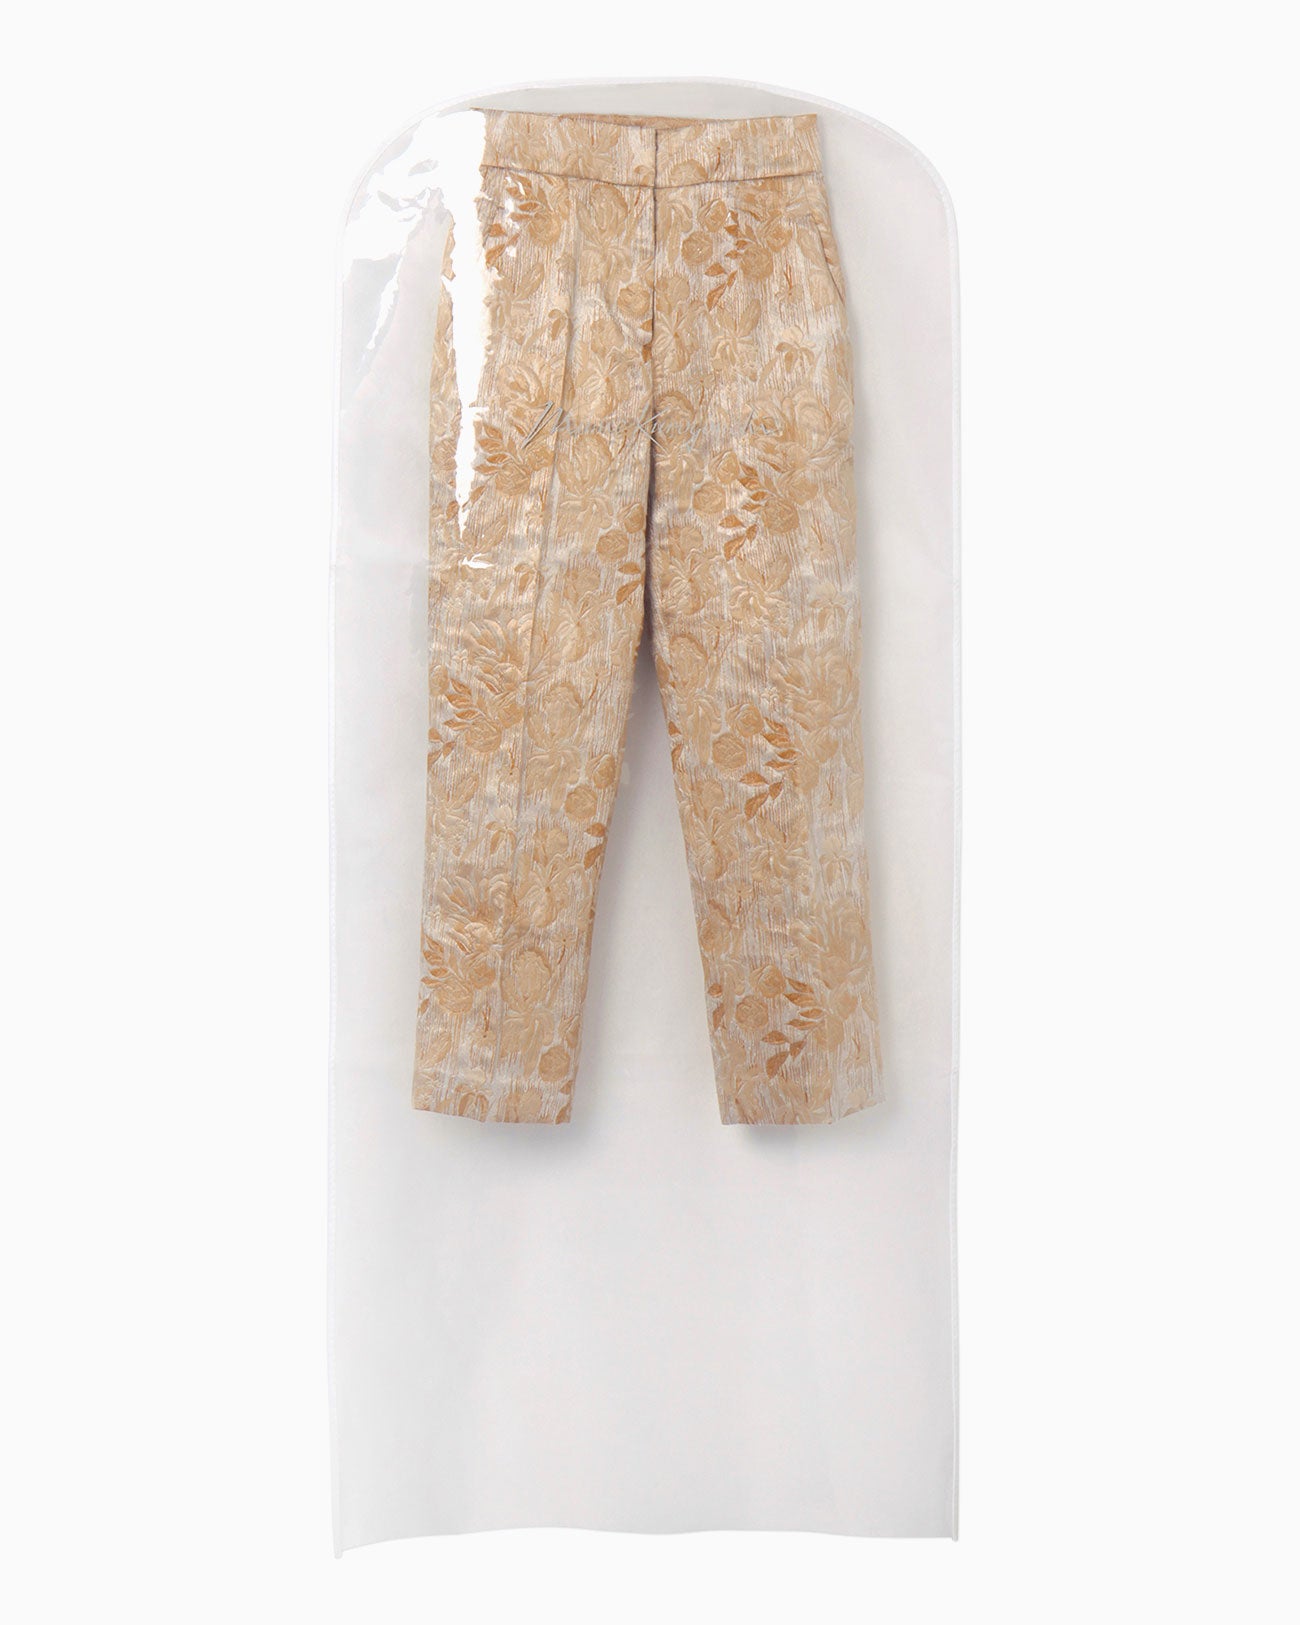 mame Hazy Floral Jacquard Trousers サイズ2 | workoffice.com.uy